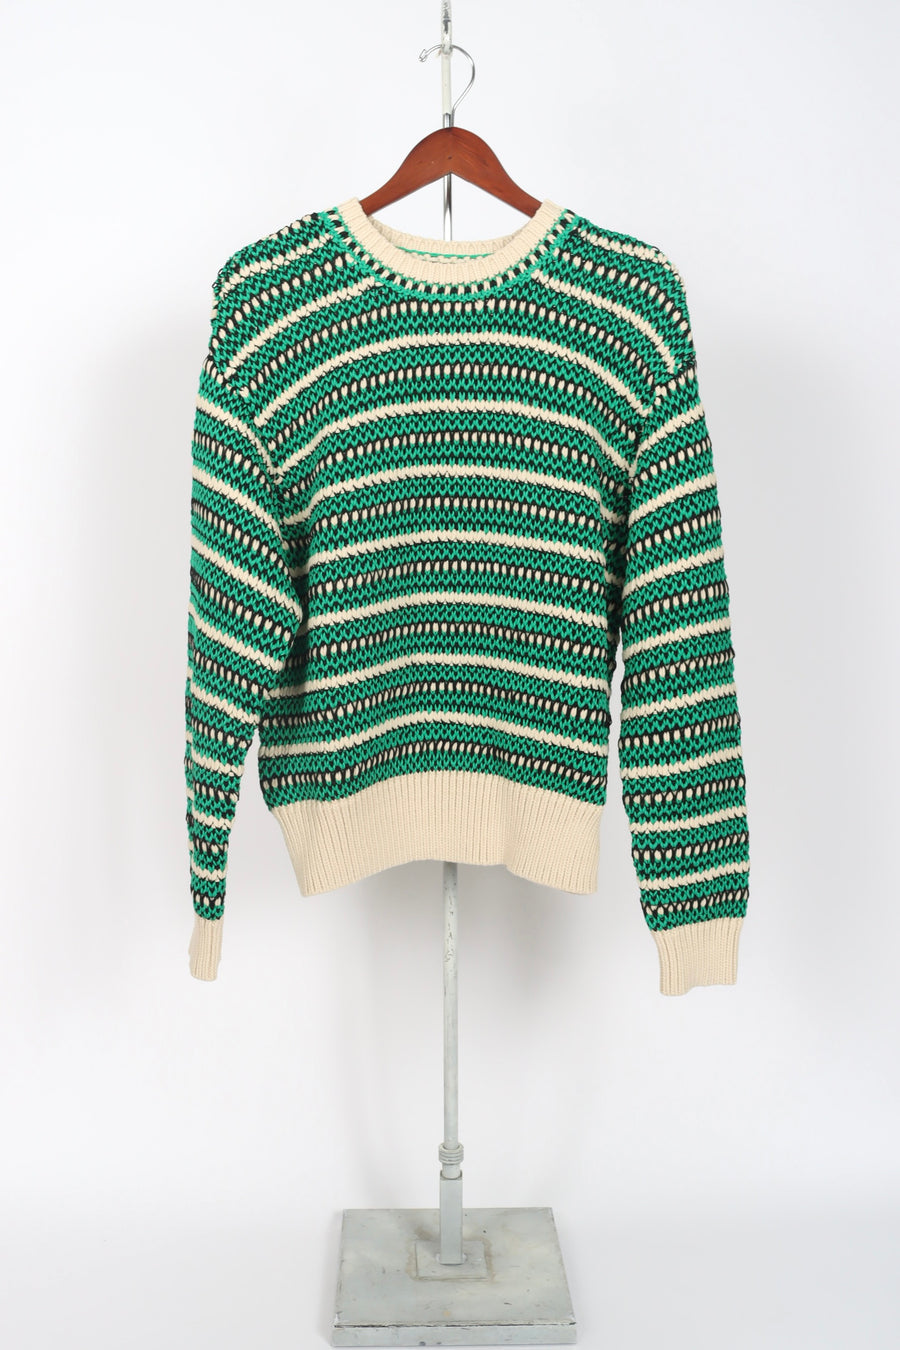 Hilo Pullover - Mint Green